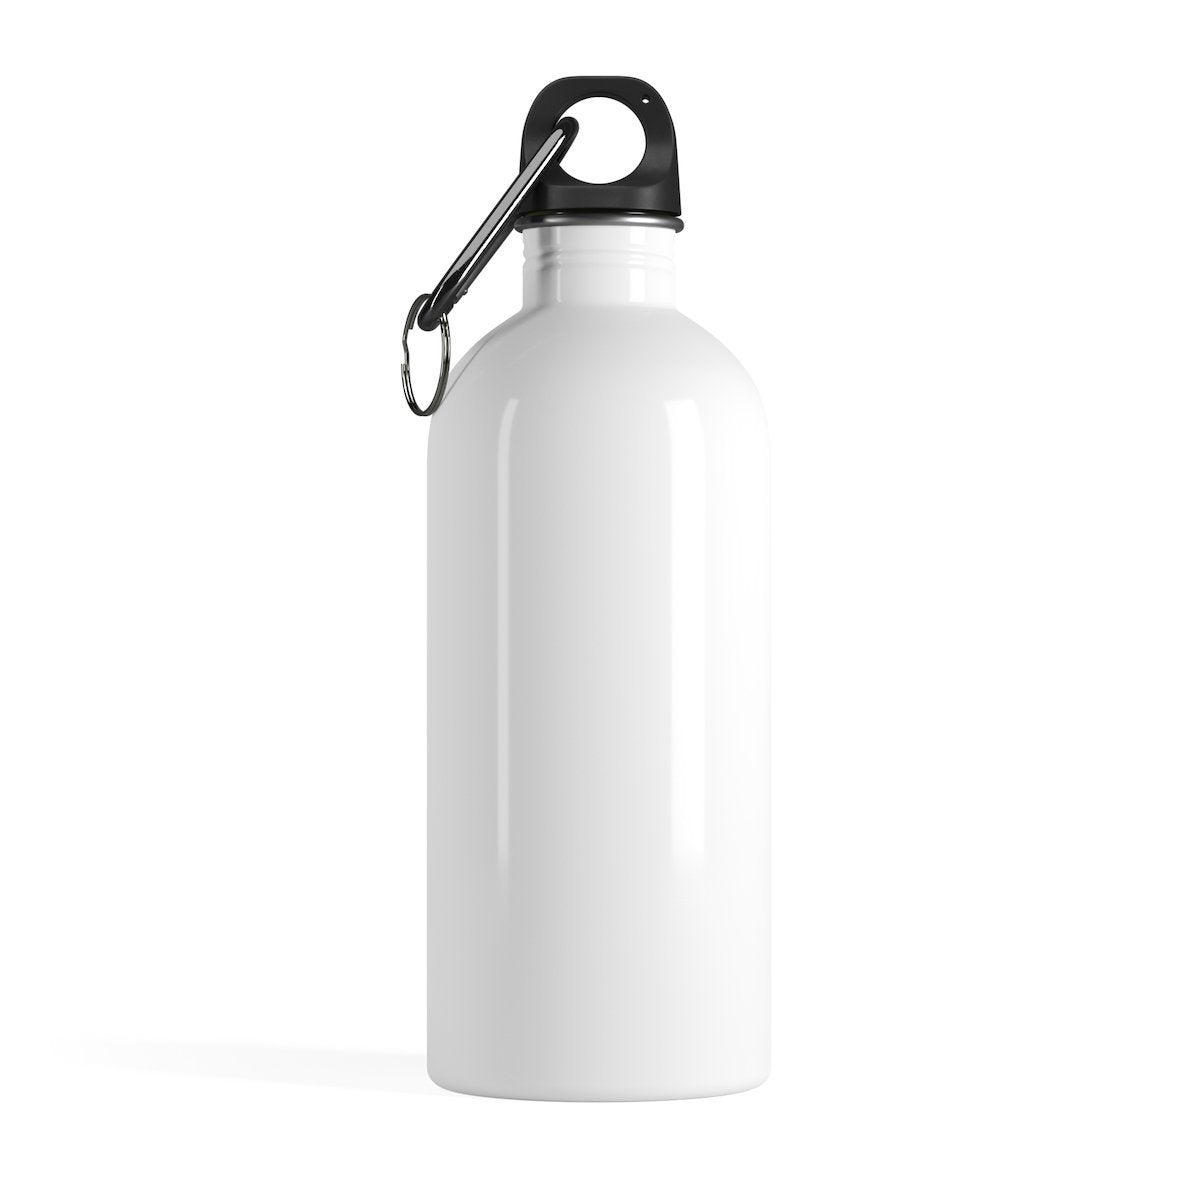 Made from lightweight stainless steel, this cat water bottle is sturdy and perfect for carrying around with you.